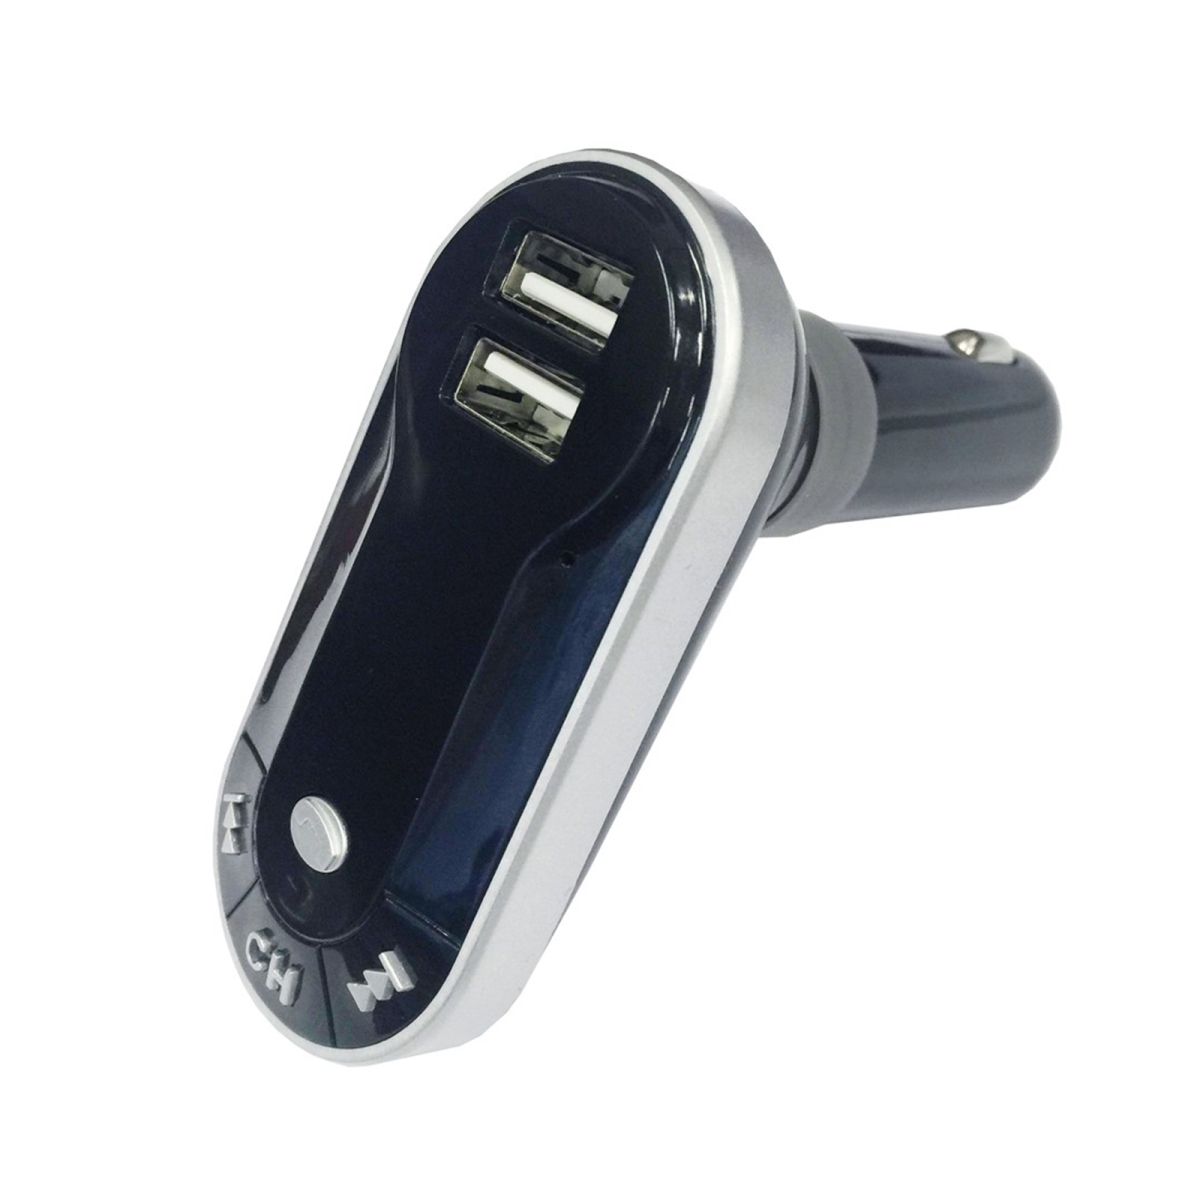 Picture of Naxa NA-3032 Universal FM transmitter Car Adapter & MP3 Player with Bluetooth